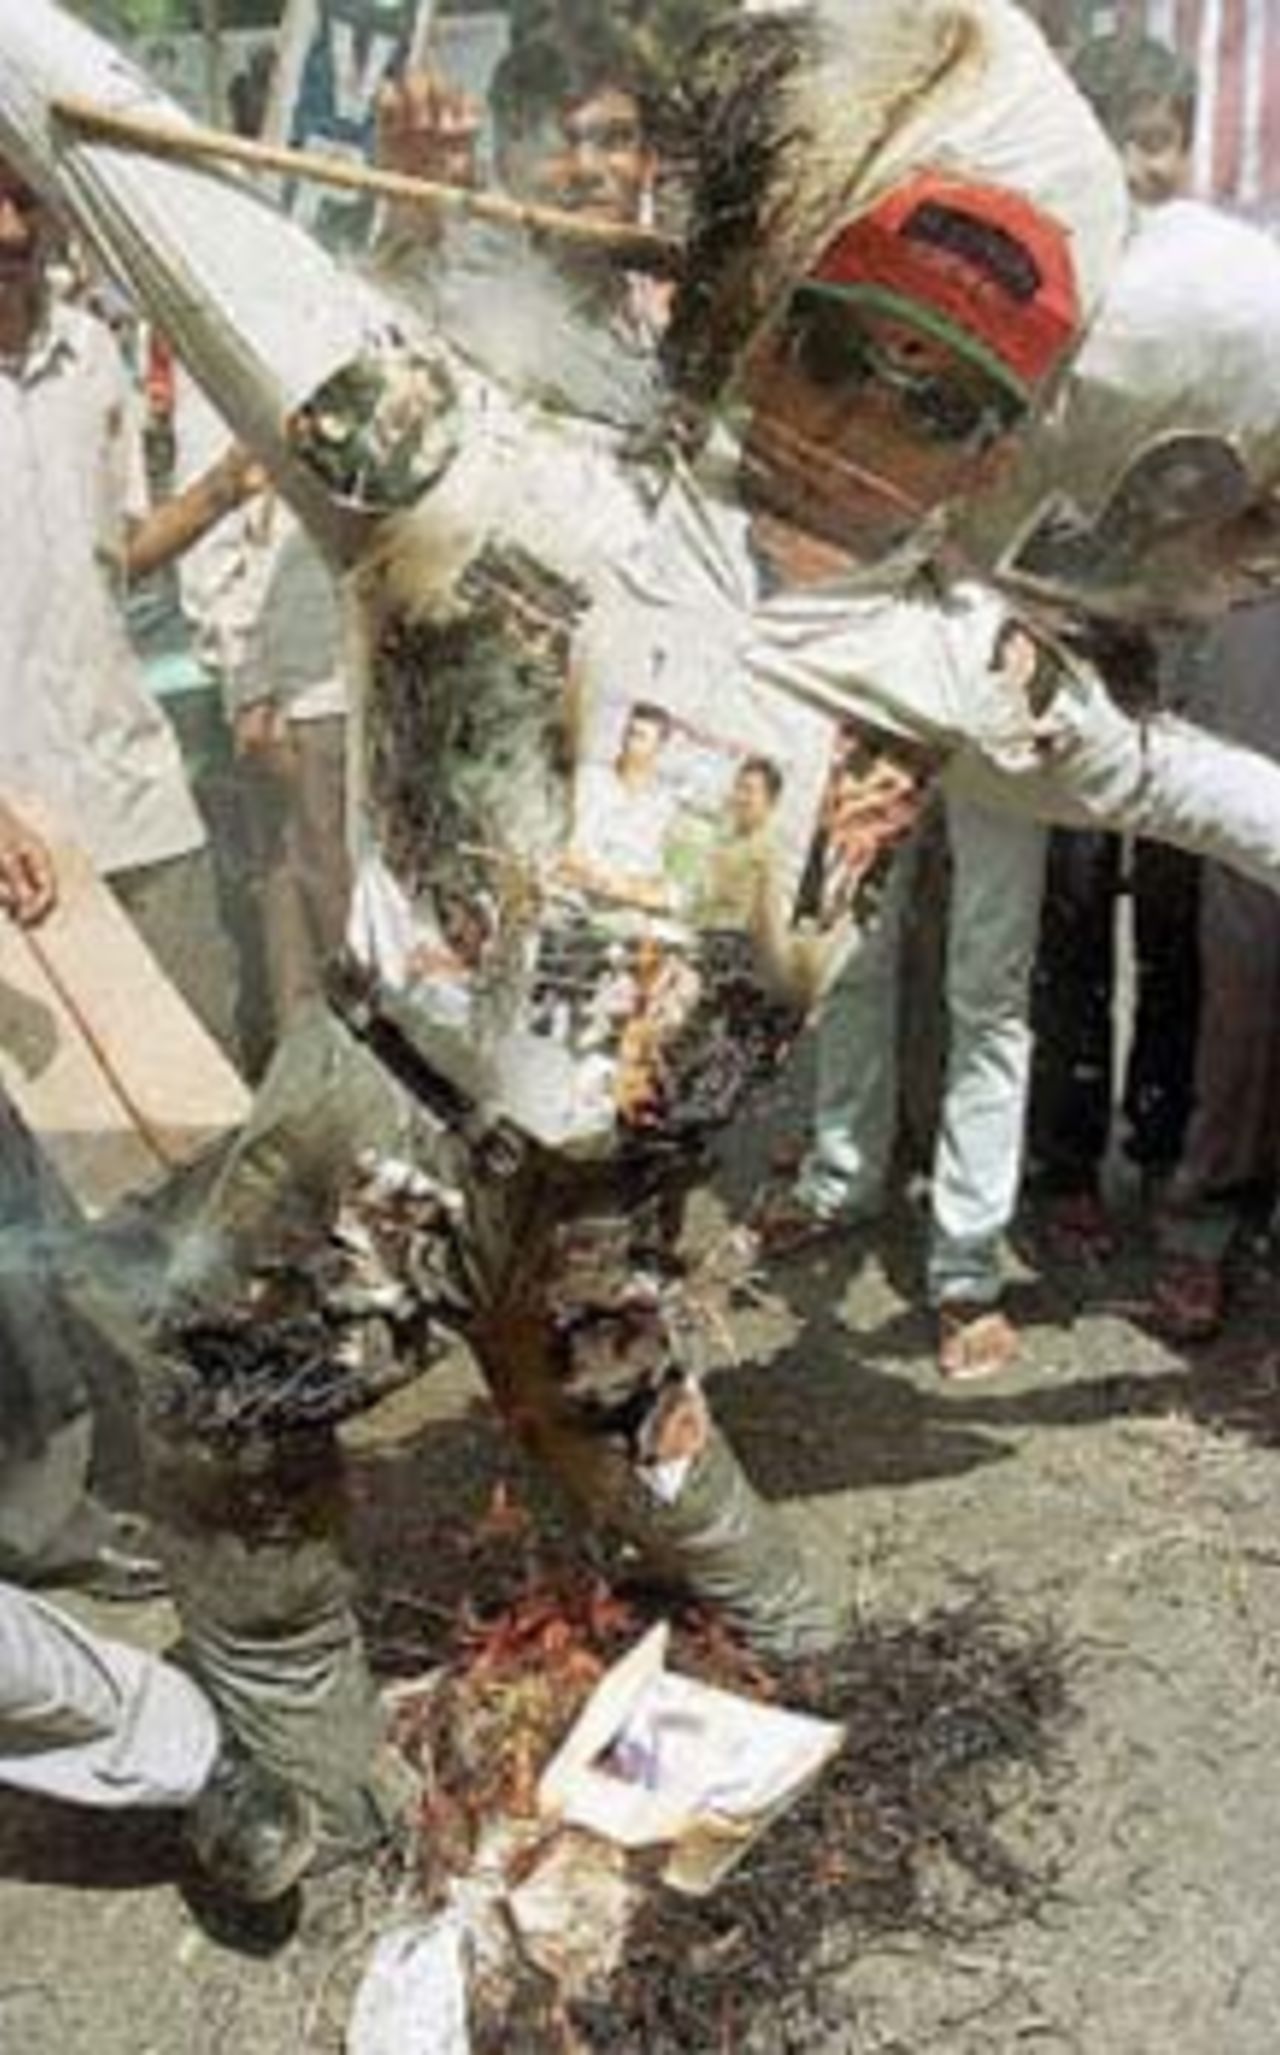 Members of the students wing of Bharatiya Janata Party (BJP) burn an effigy of Indian cricketeer Ajay Jadeja along with four other Indian players after holding a mock public trial that sentenced them to death during a demonstration in  Bangalore 06 November 2000. Five Indian cricket players Ajay  Jadeja,Manoj Prabhakar, Ajay Sharma, Mohammad Azharuddin  and Nayan Mongia have been banned from the game by  India's cricket board after Central Bureau of Investigation (CBI) named them along with other international cricket players in their match-fixing report.